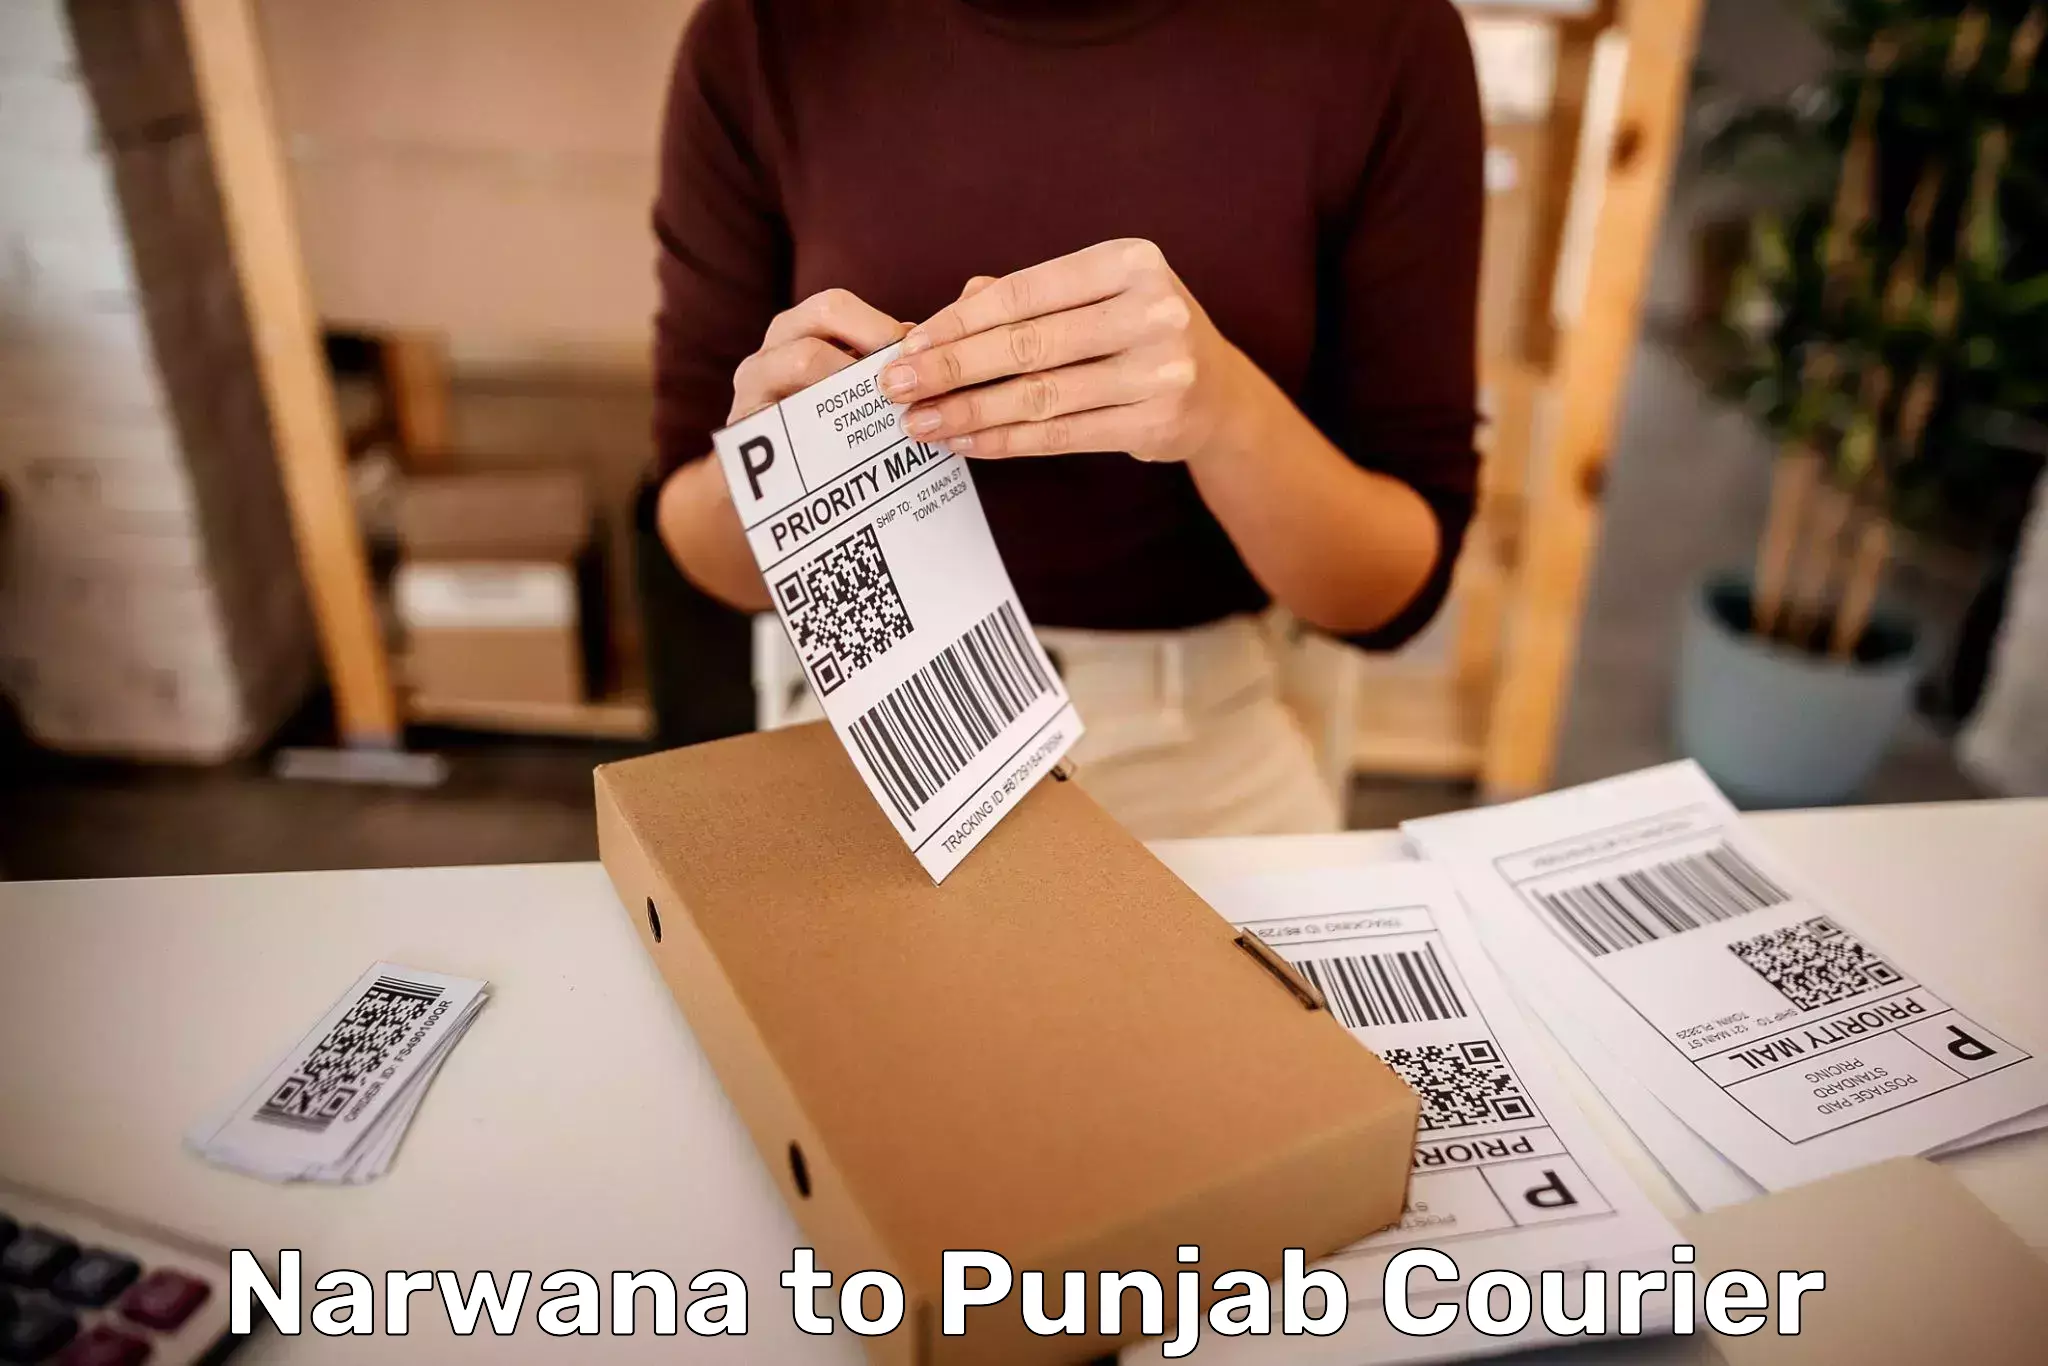 Luggage delivery app Narwana to Punjab